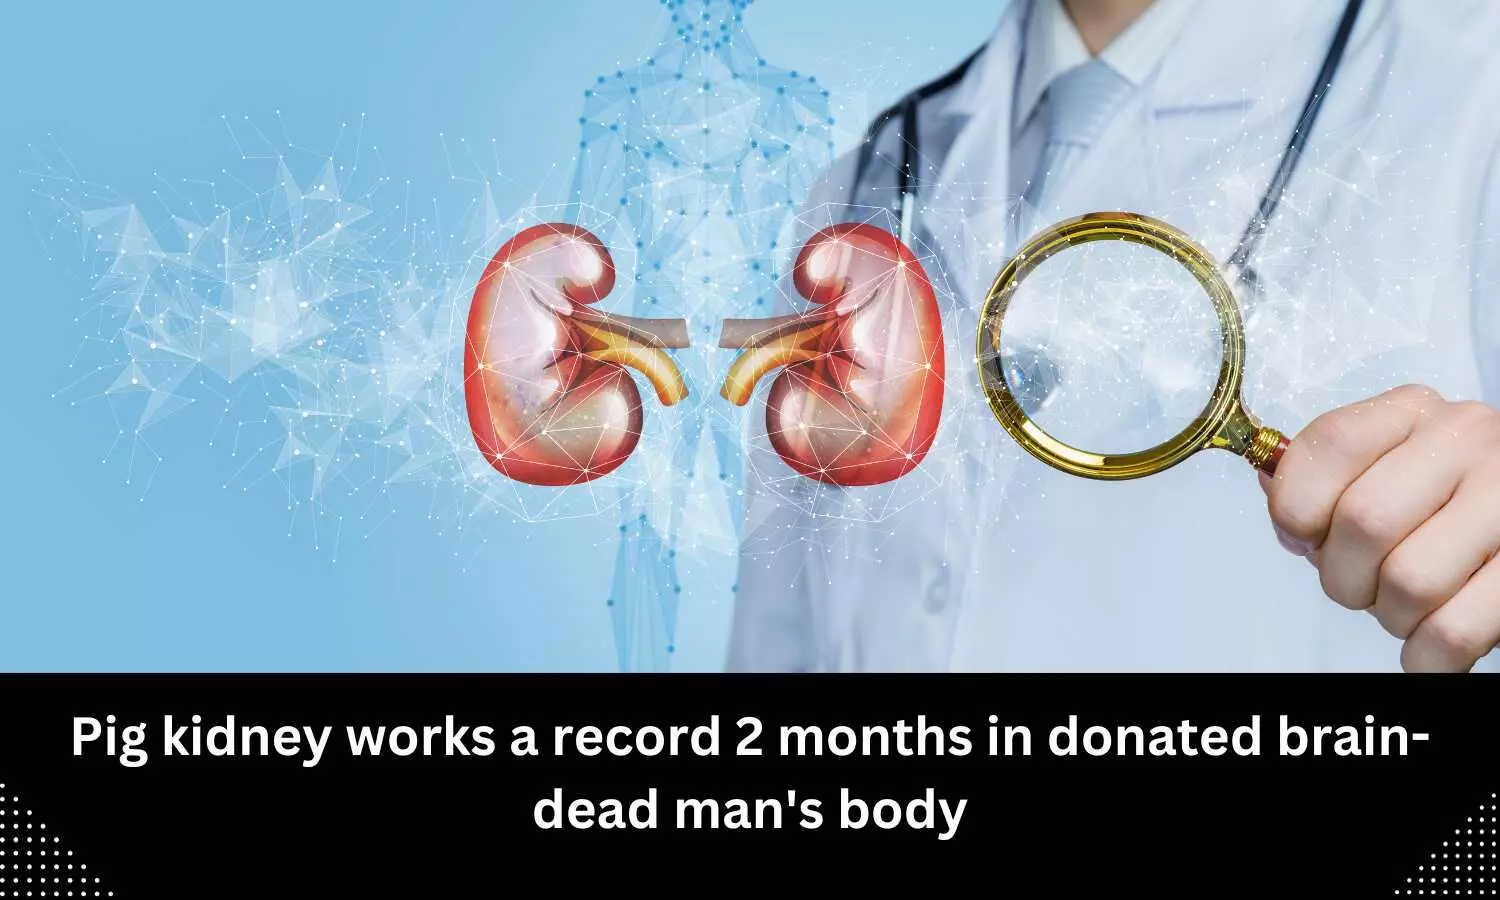 Pig kidney works record 2 months in donated brain-dead mans body